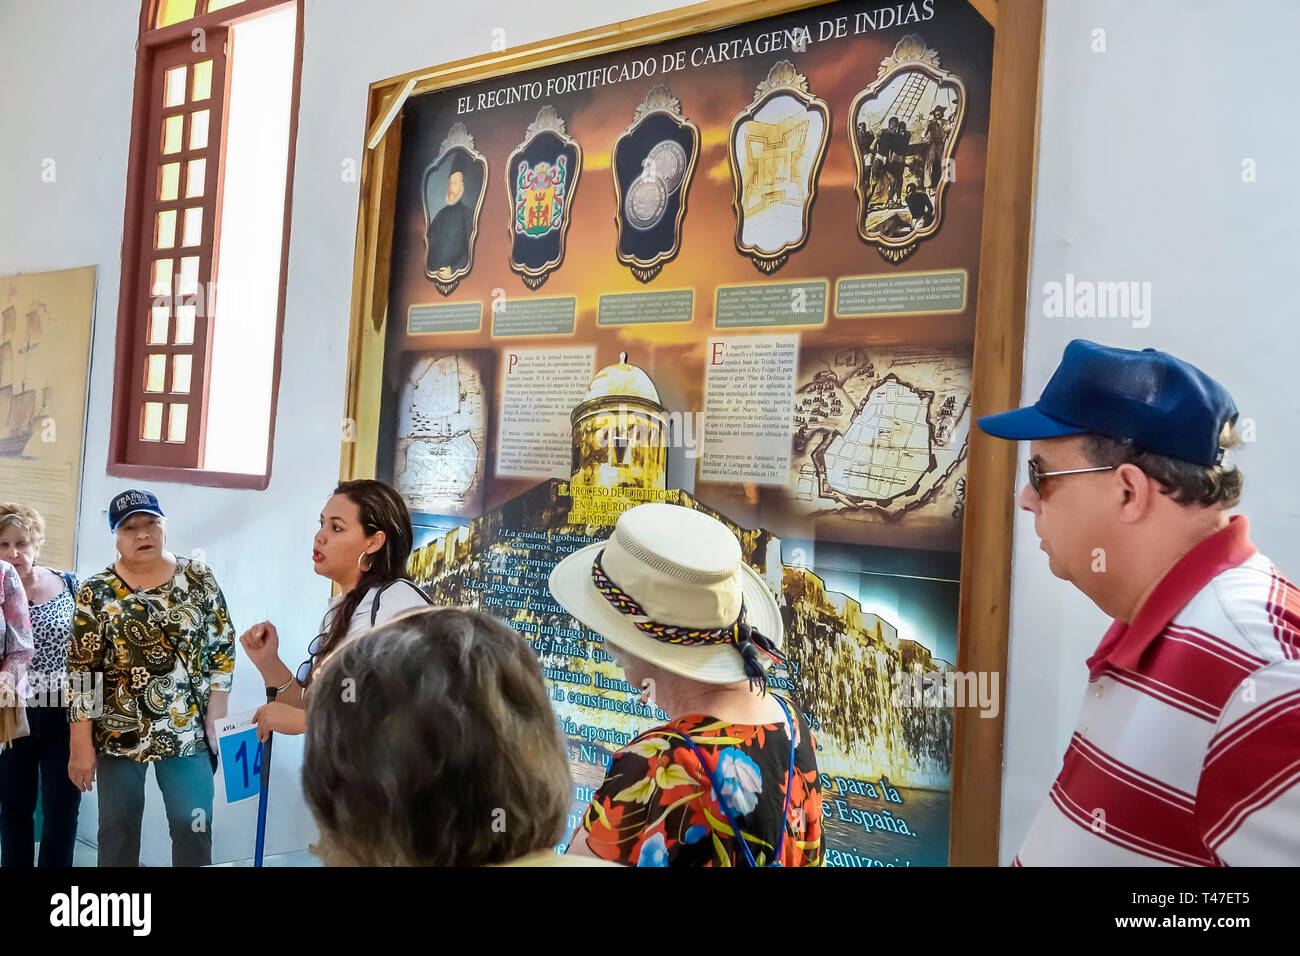 Cartagena Colombia,Museo Naval del Caribe,Caribbean naval museum,Hispanic resident,residents,man men male,woman female women,guided tour,interpretive Stock Photo